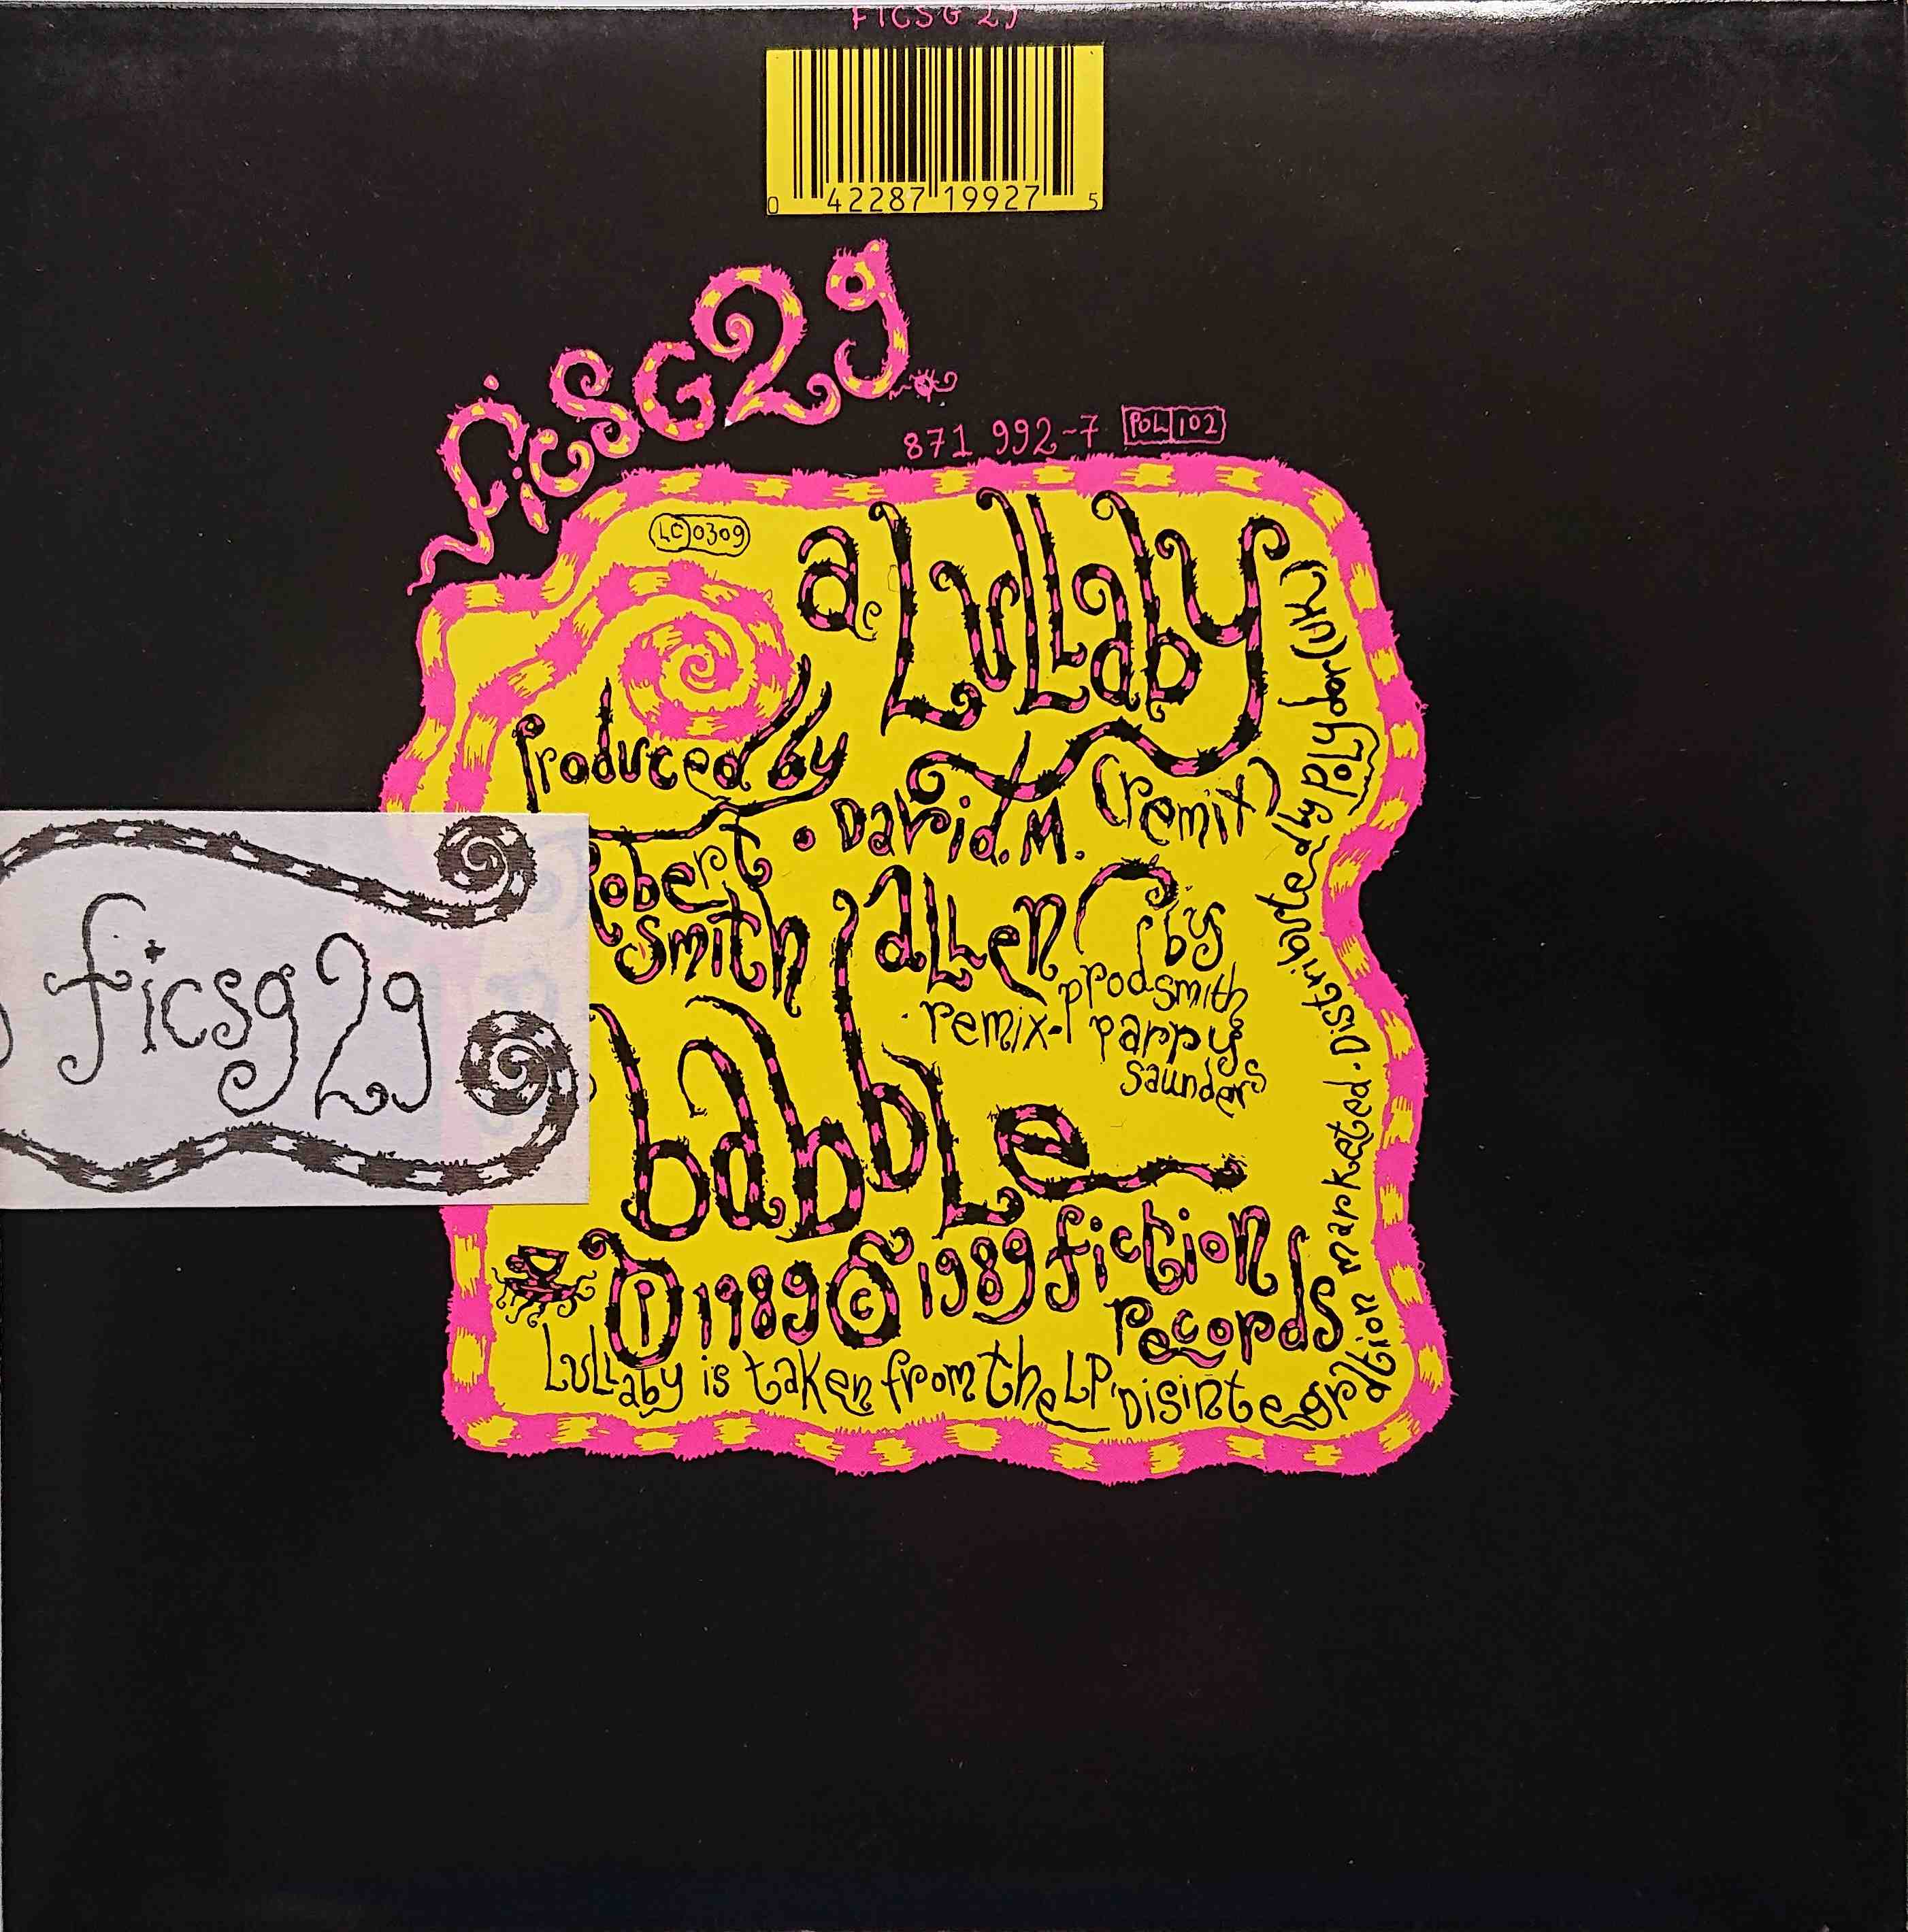 Back cover of FICSG 29